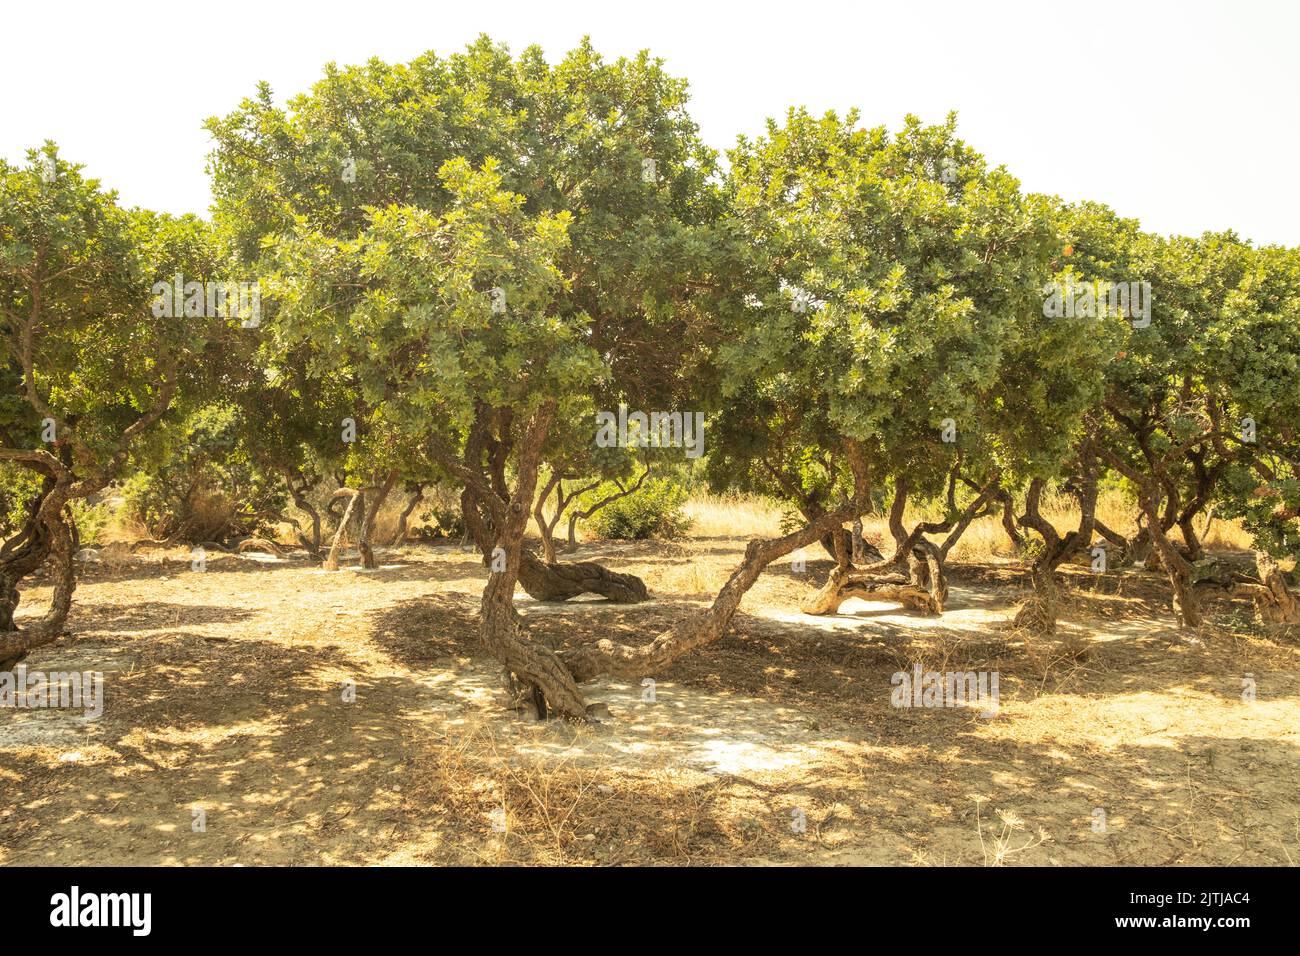 Gum Tree Forest in Chios Island of Greece. Stock Photo